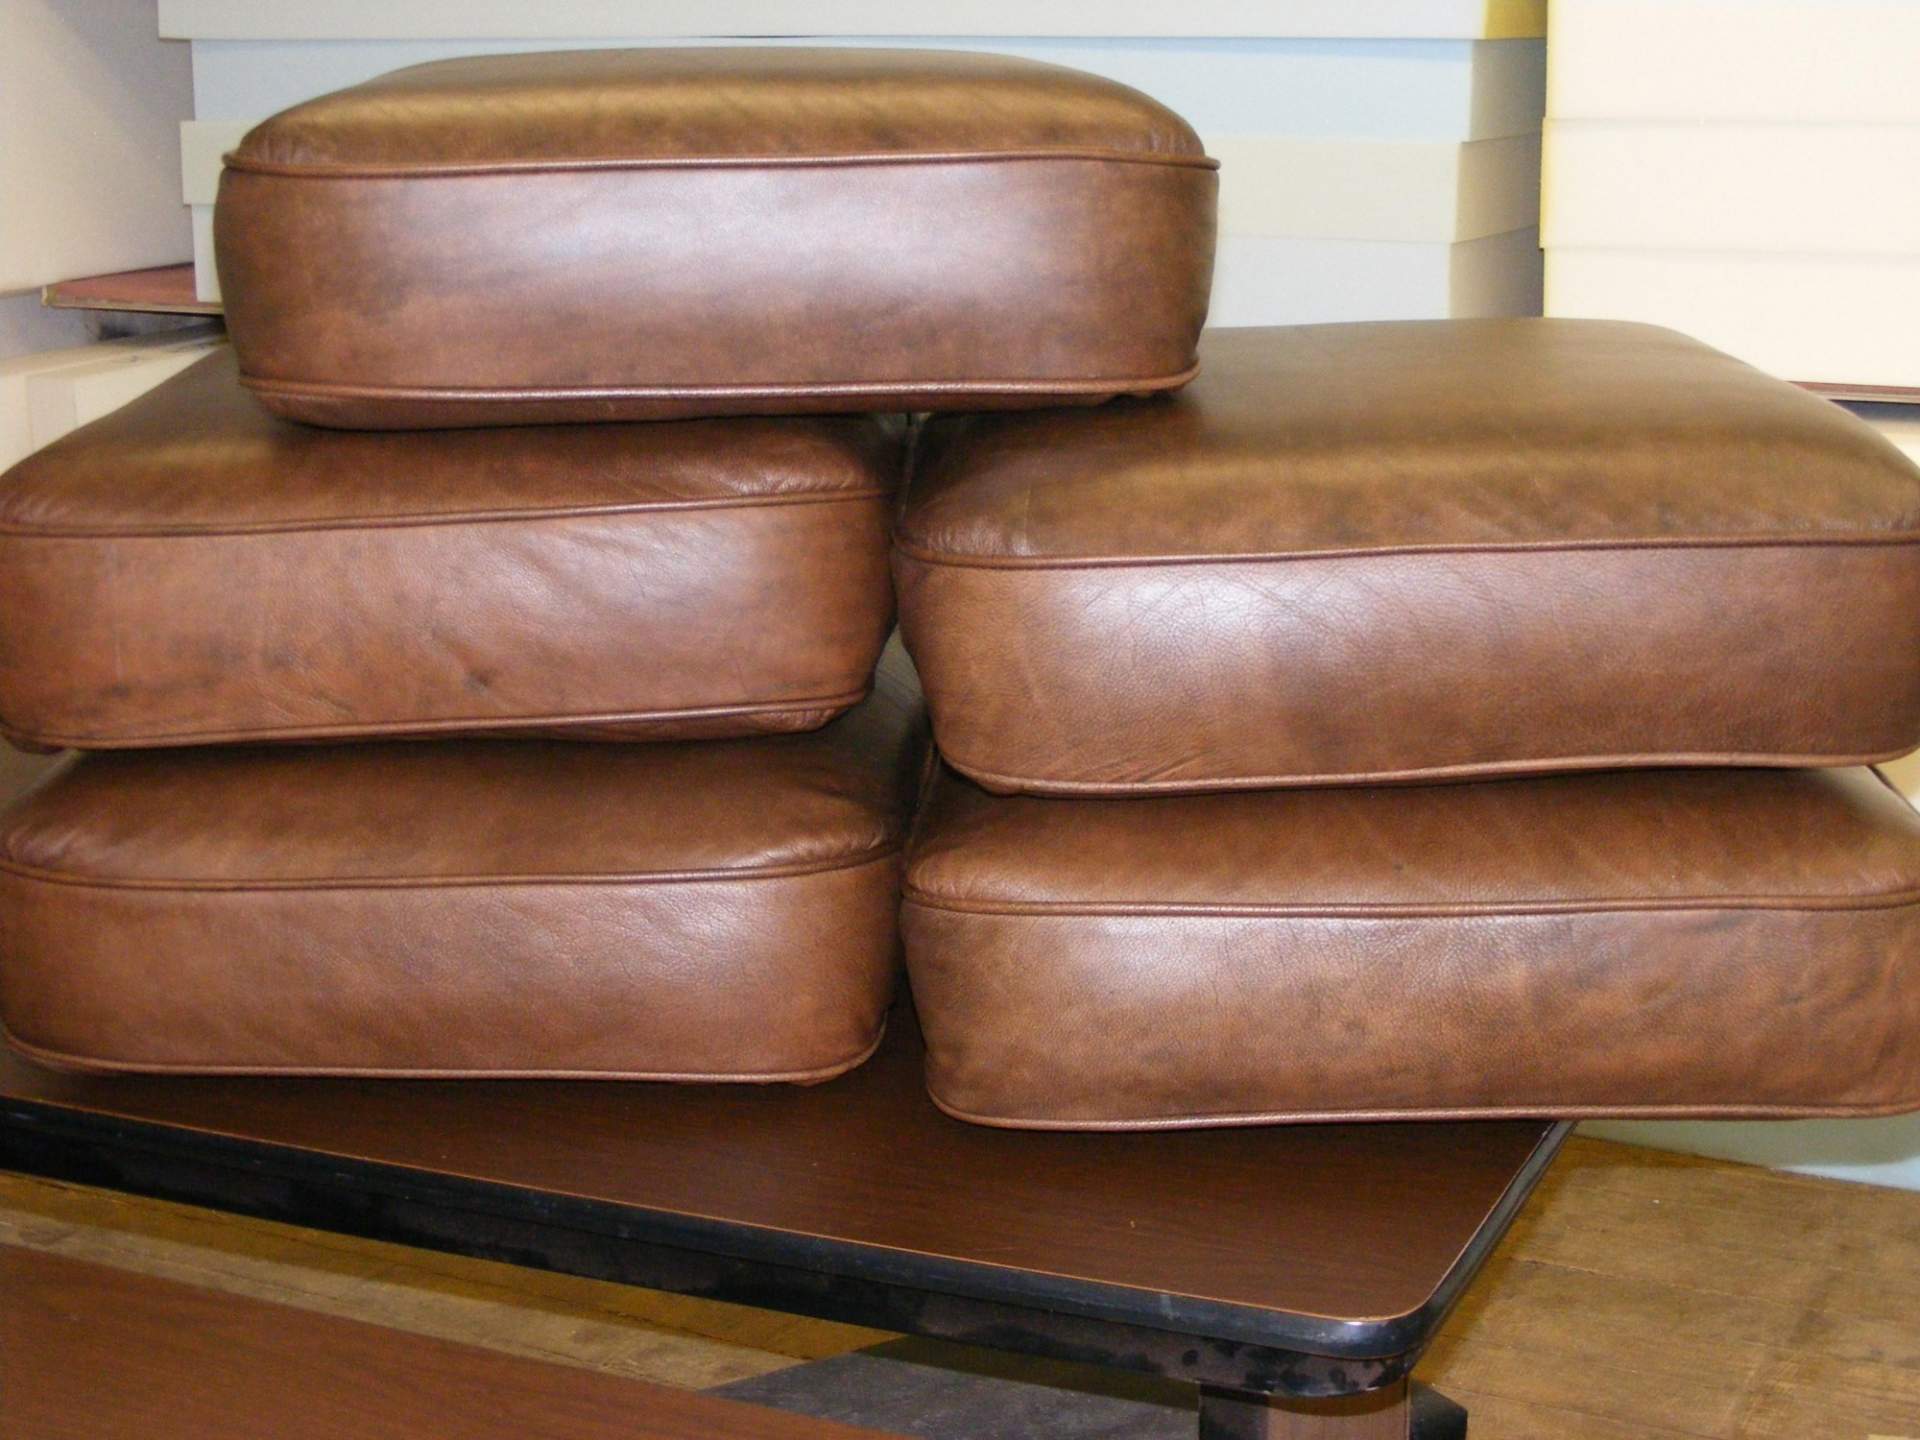 SOFA SEATING THICK HIGH DENSITY FOAM HELP FOR A FIRMER & MORE 3 SEATER CHAIR 